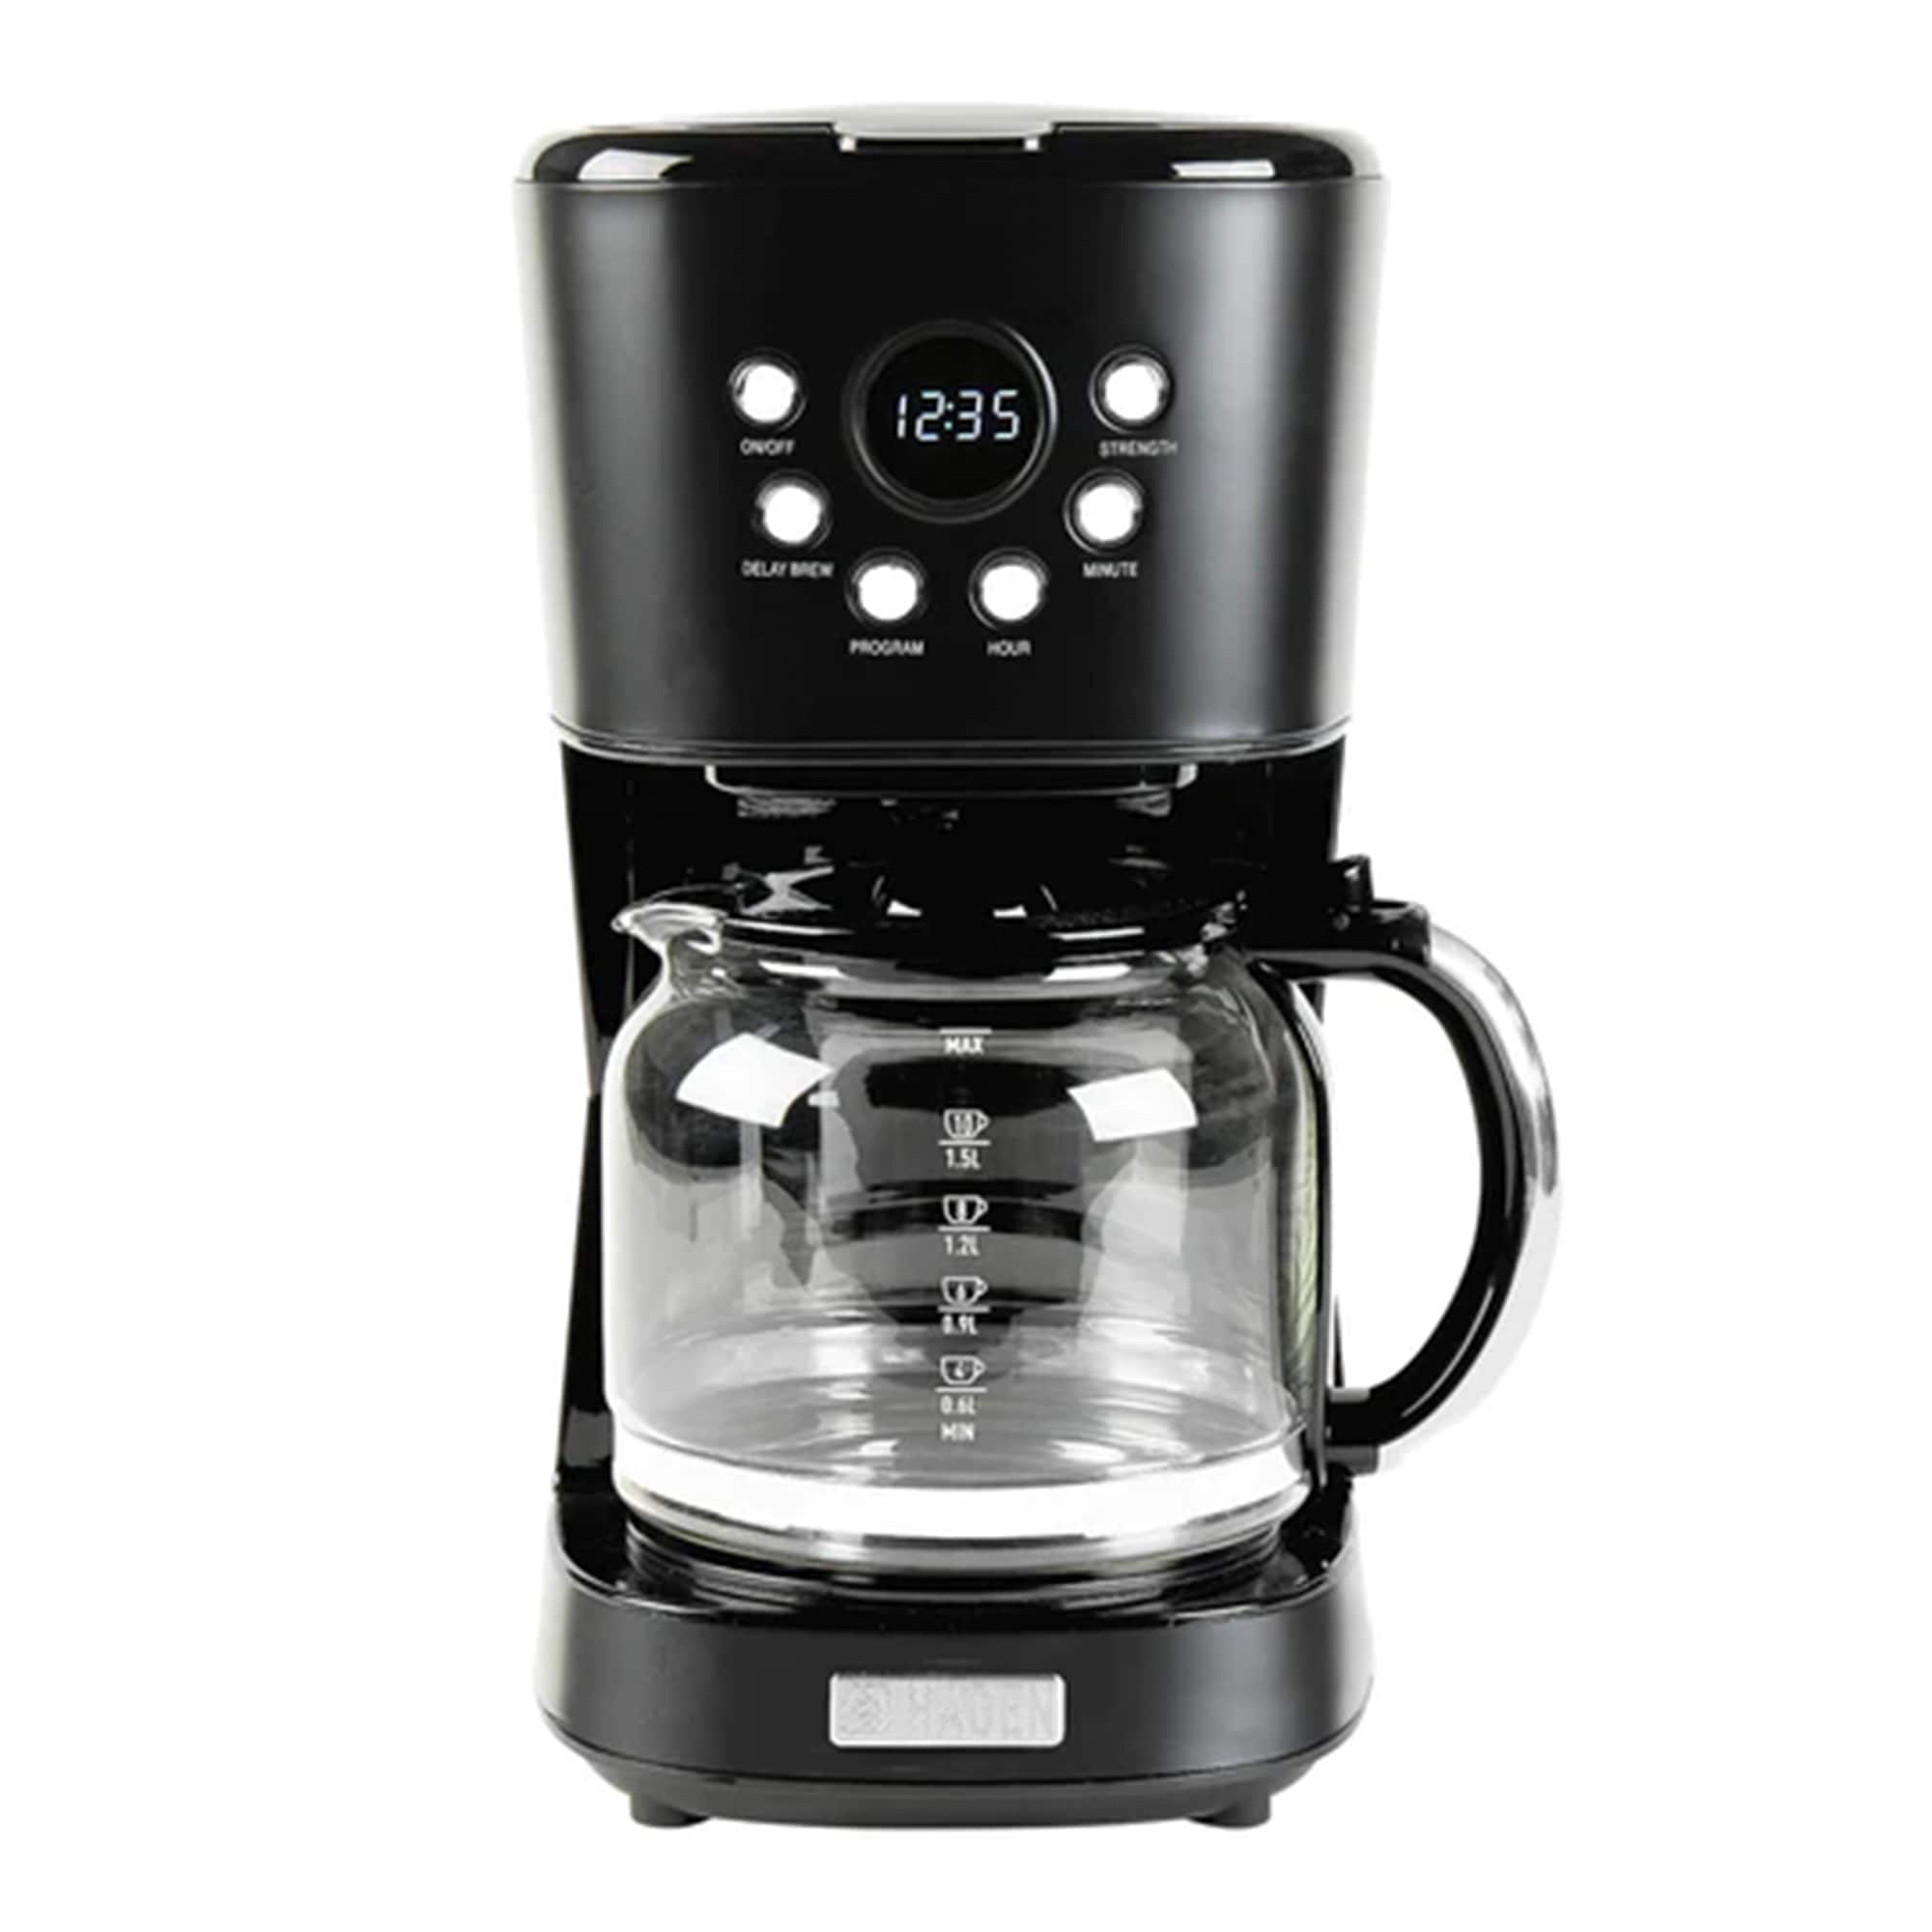 https://ak1.ostkcdn.com/images/products/is/images/direct/0b89a26ece17140fc7eddef07c7cd28b7b1791bd/Haden-Heritage-12-Cup-Programmable-Retro-Coffee-Maker-Machine%2C-Black-Chrome.jpg